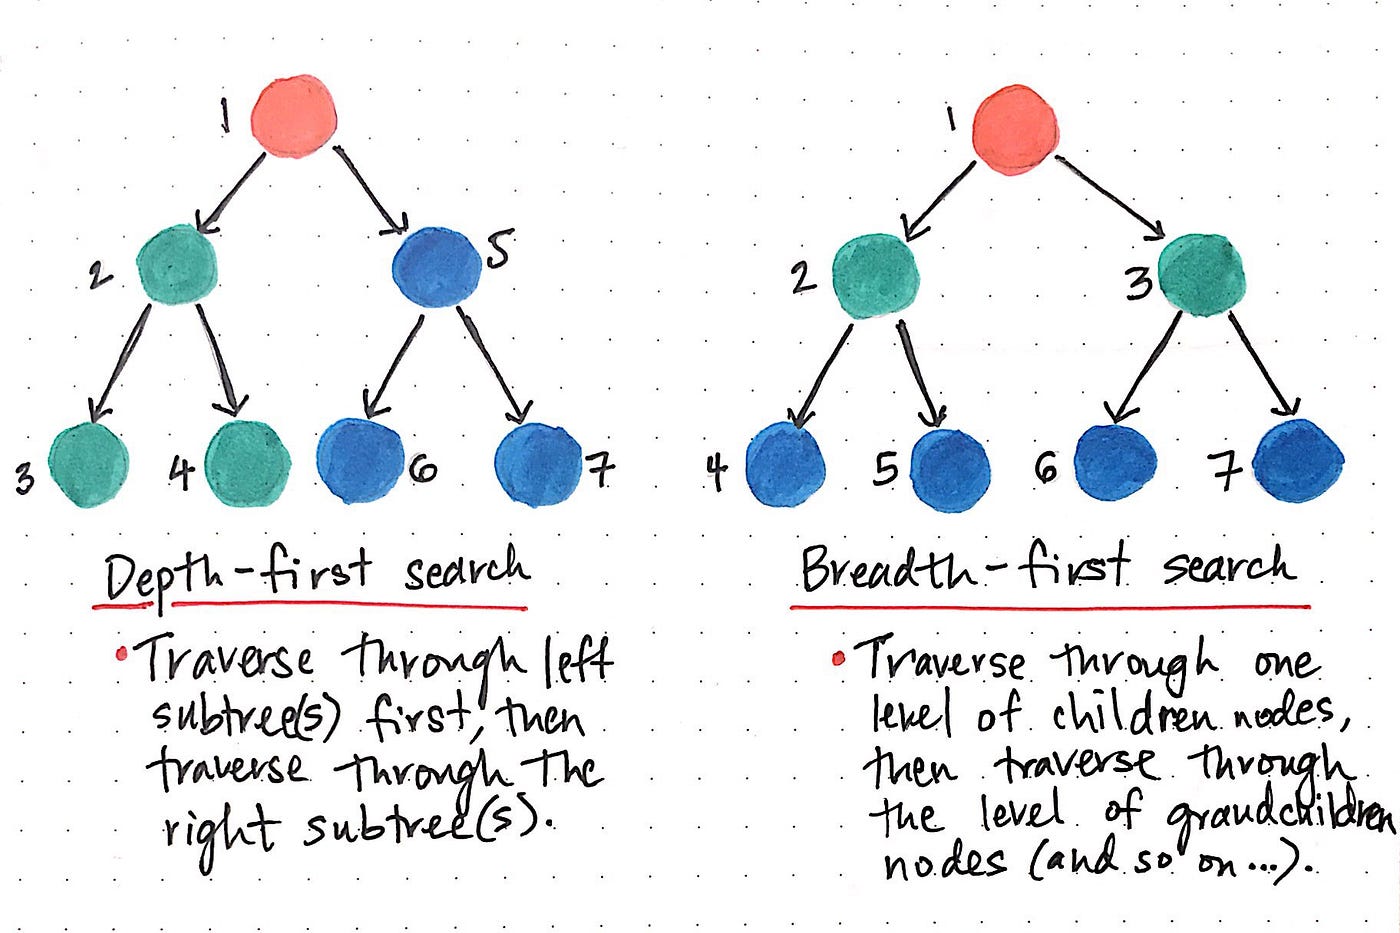 Tree Traversal: Breadth-First Search vs Depth-First Search